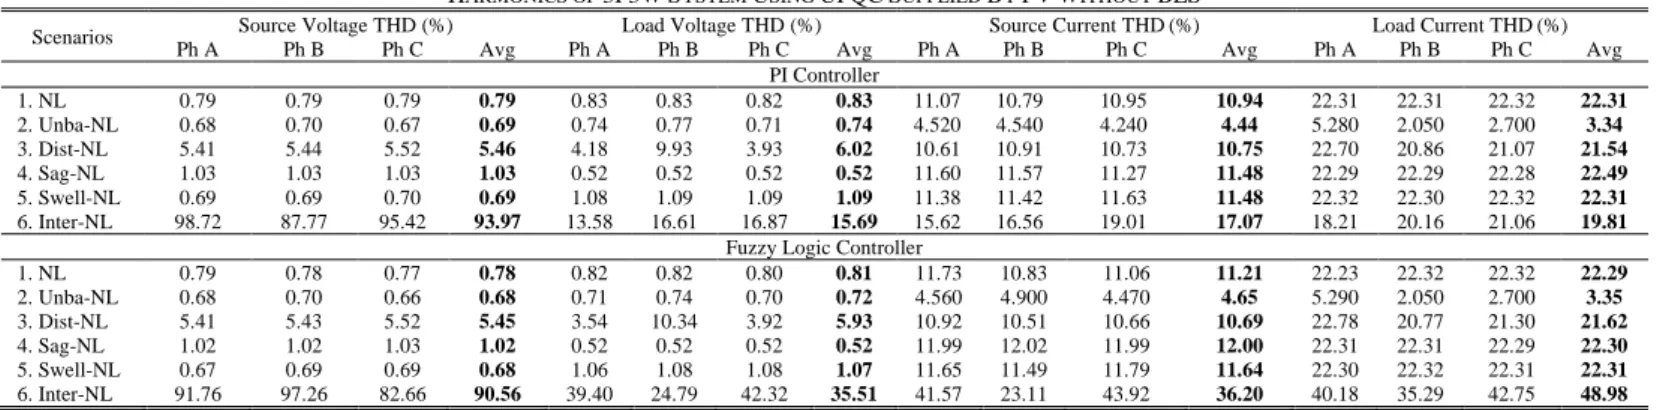 Table  IV  indicates  that  UPQC  supplied  by  PV  using  BES  in  3P3W  system  with  PI  and  FLC  controls  for  scenarios  1  to  5  is  able  to  produce  average  load  voltage  above  307  V